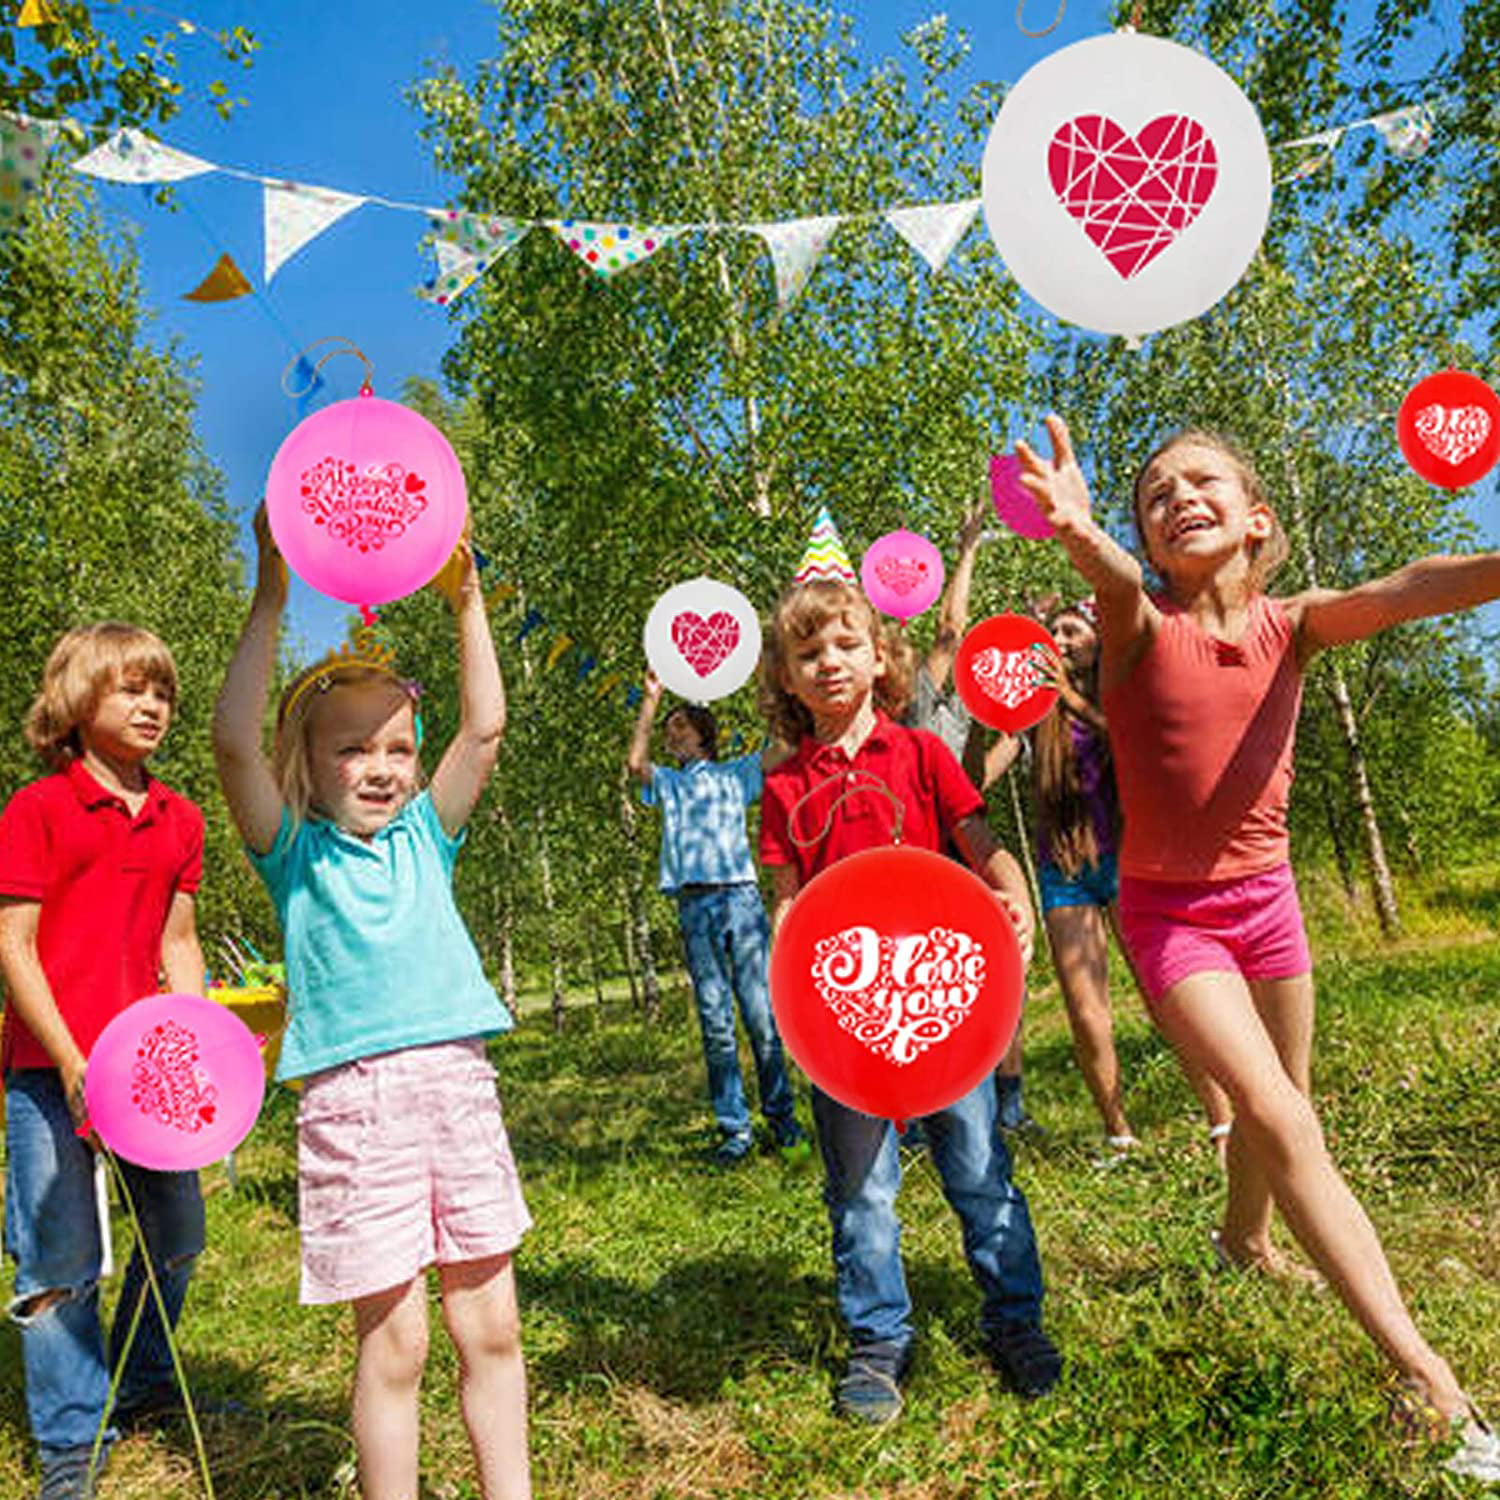 18 Inch Red Pink White Heart Printed Balloons 24pcs for Kids Valentine‘s Day Party Games Classroom Exchange Prizes Valentine Party Decorations kids Valentines Day Party Favors Punch Balloons